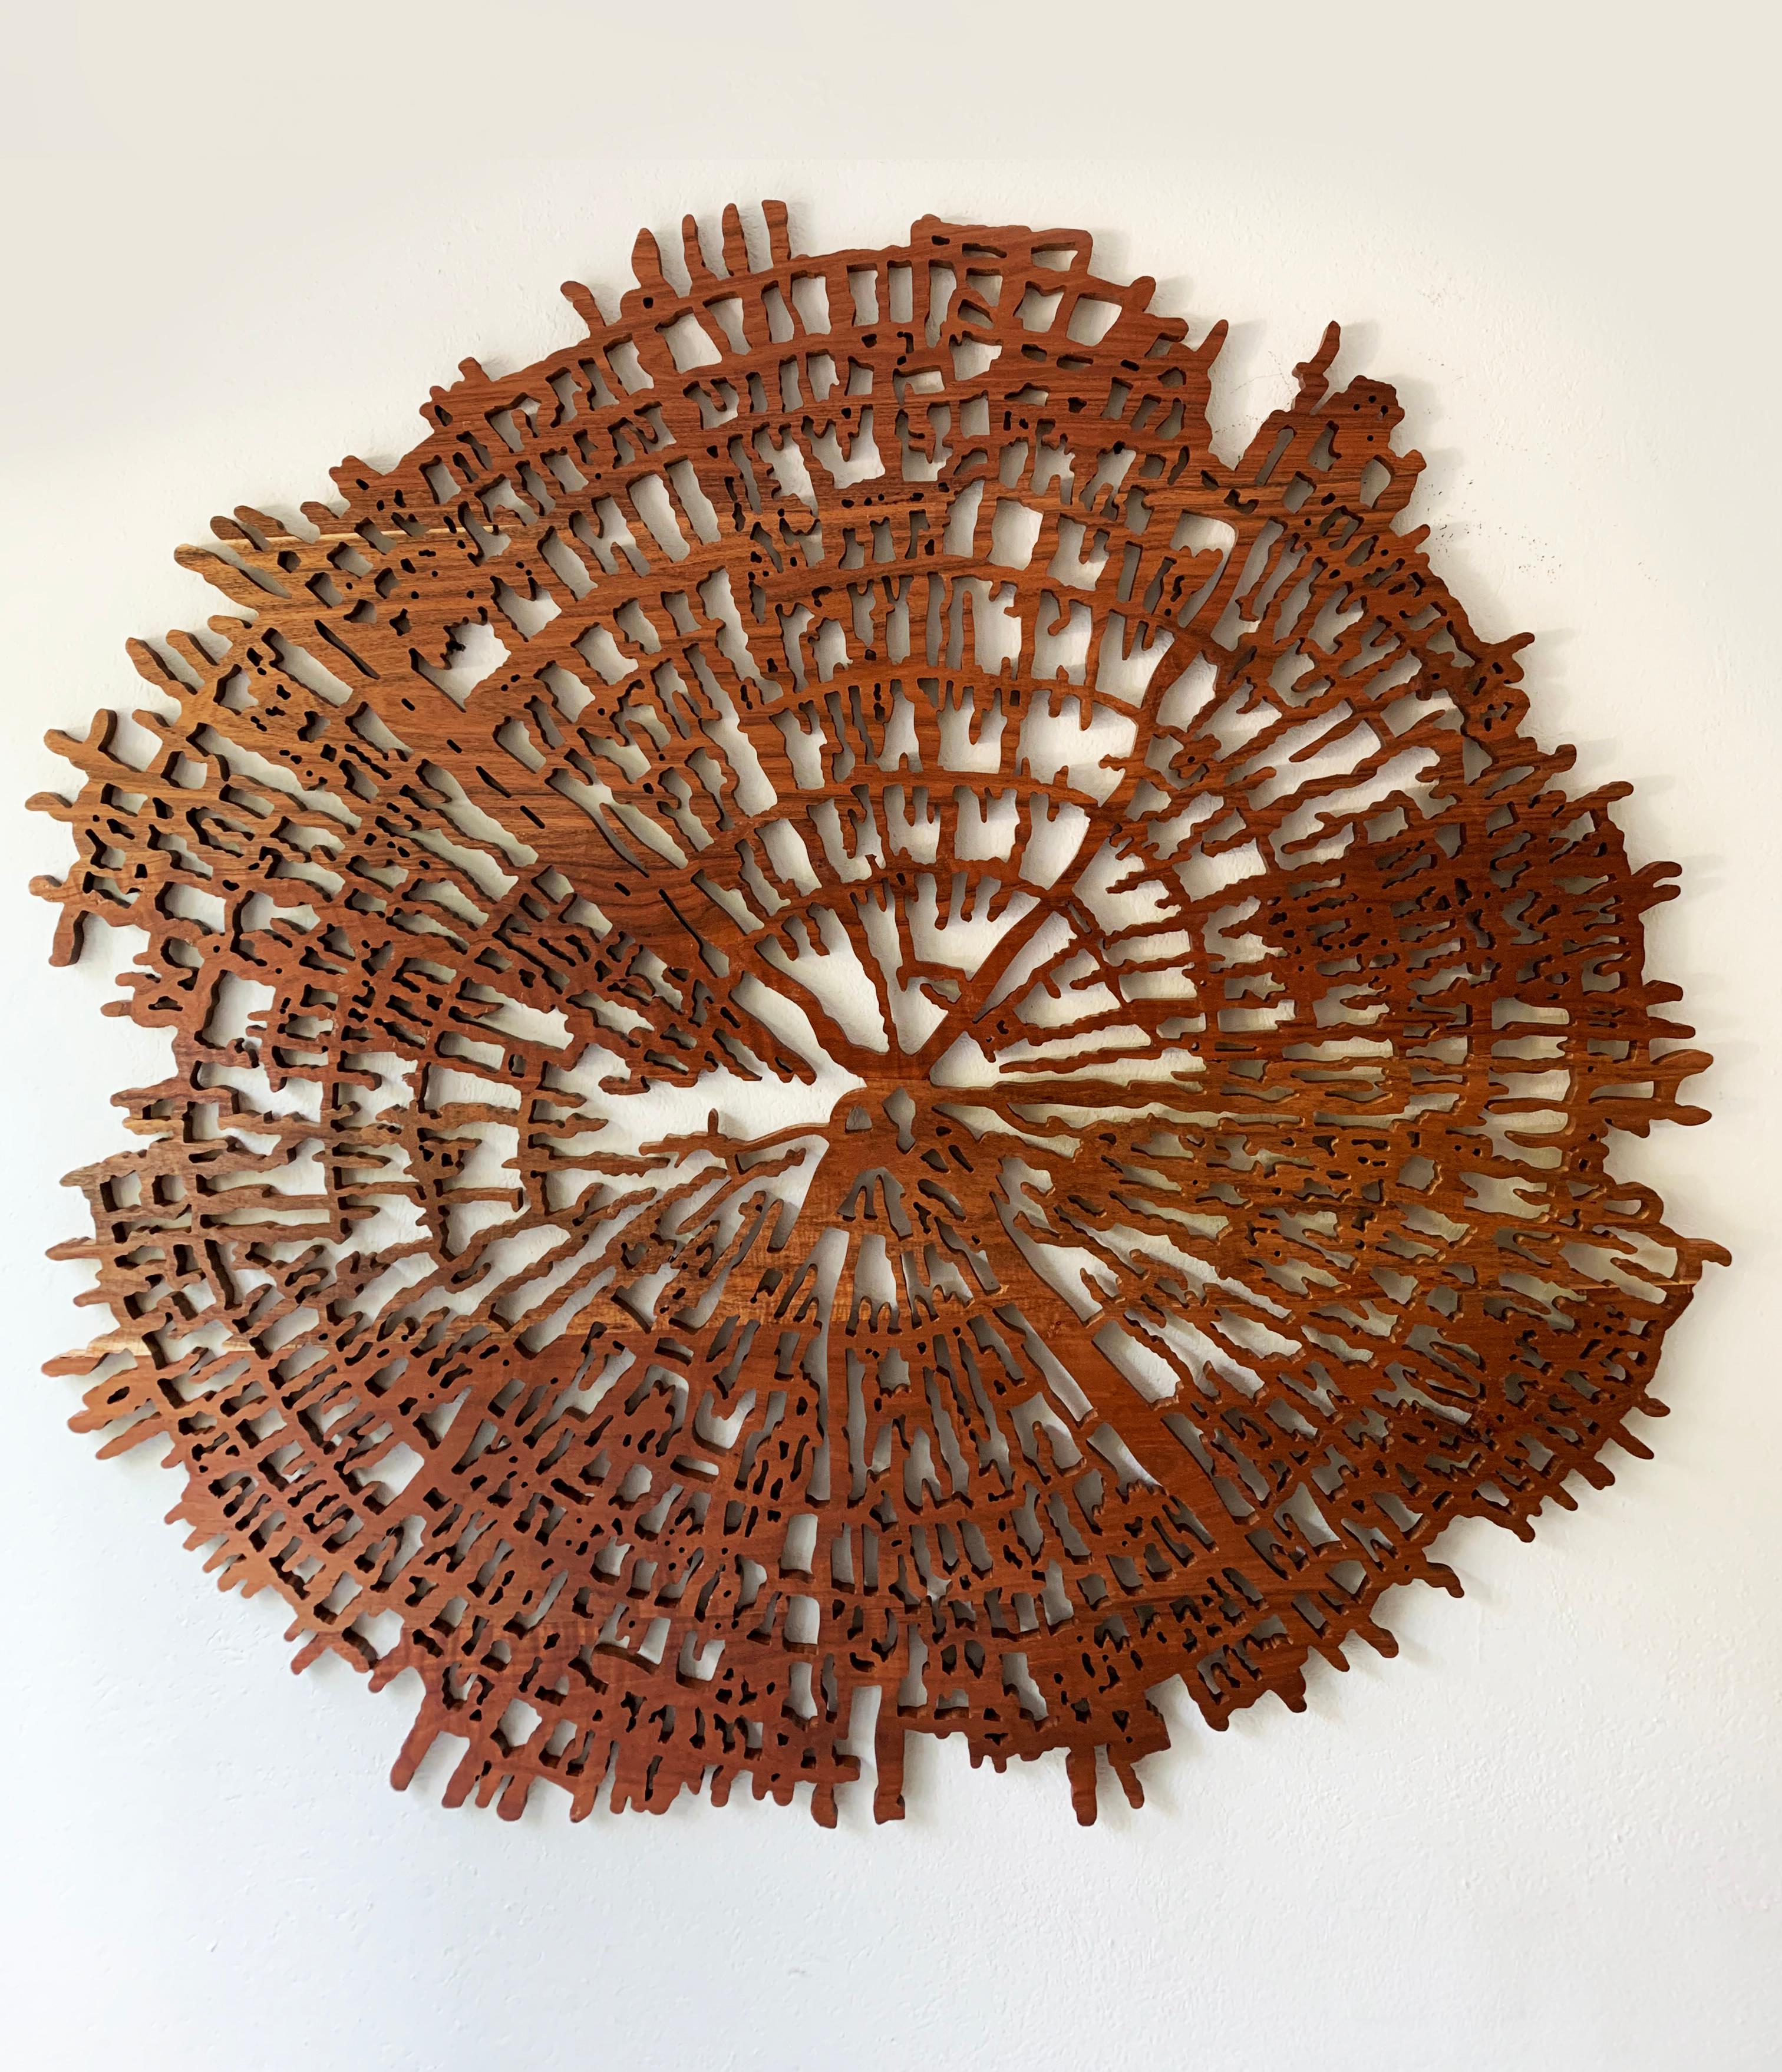 Dendrochronology of Trees in an Abstract Wooden Solid Piece - Sculpture by Arozarena De La Fuente